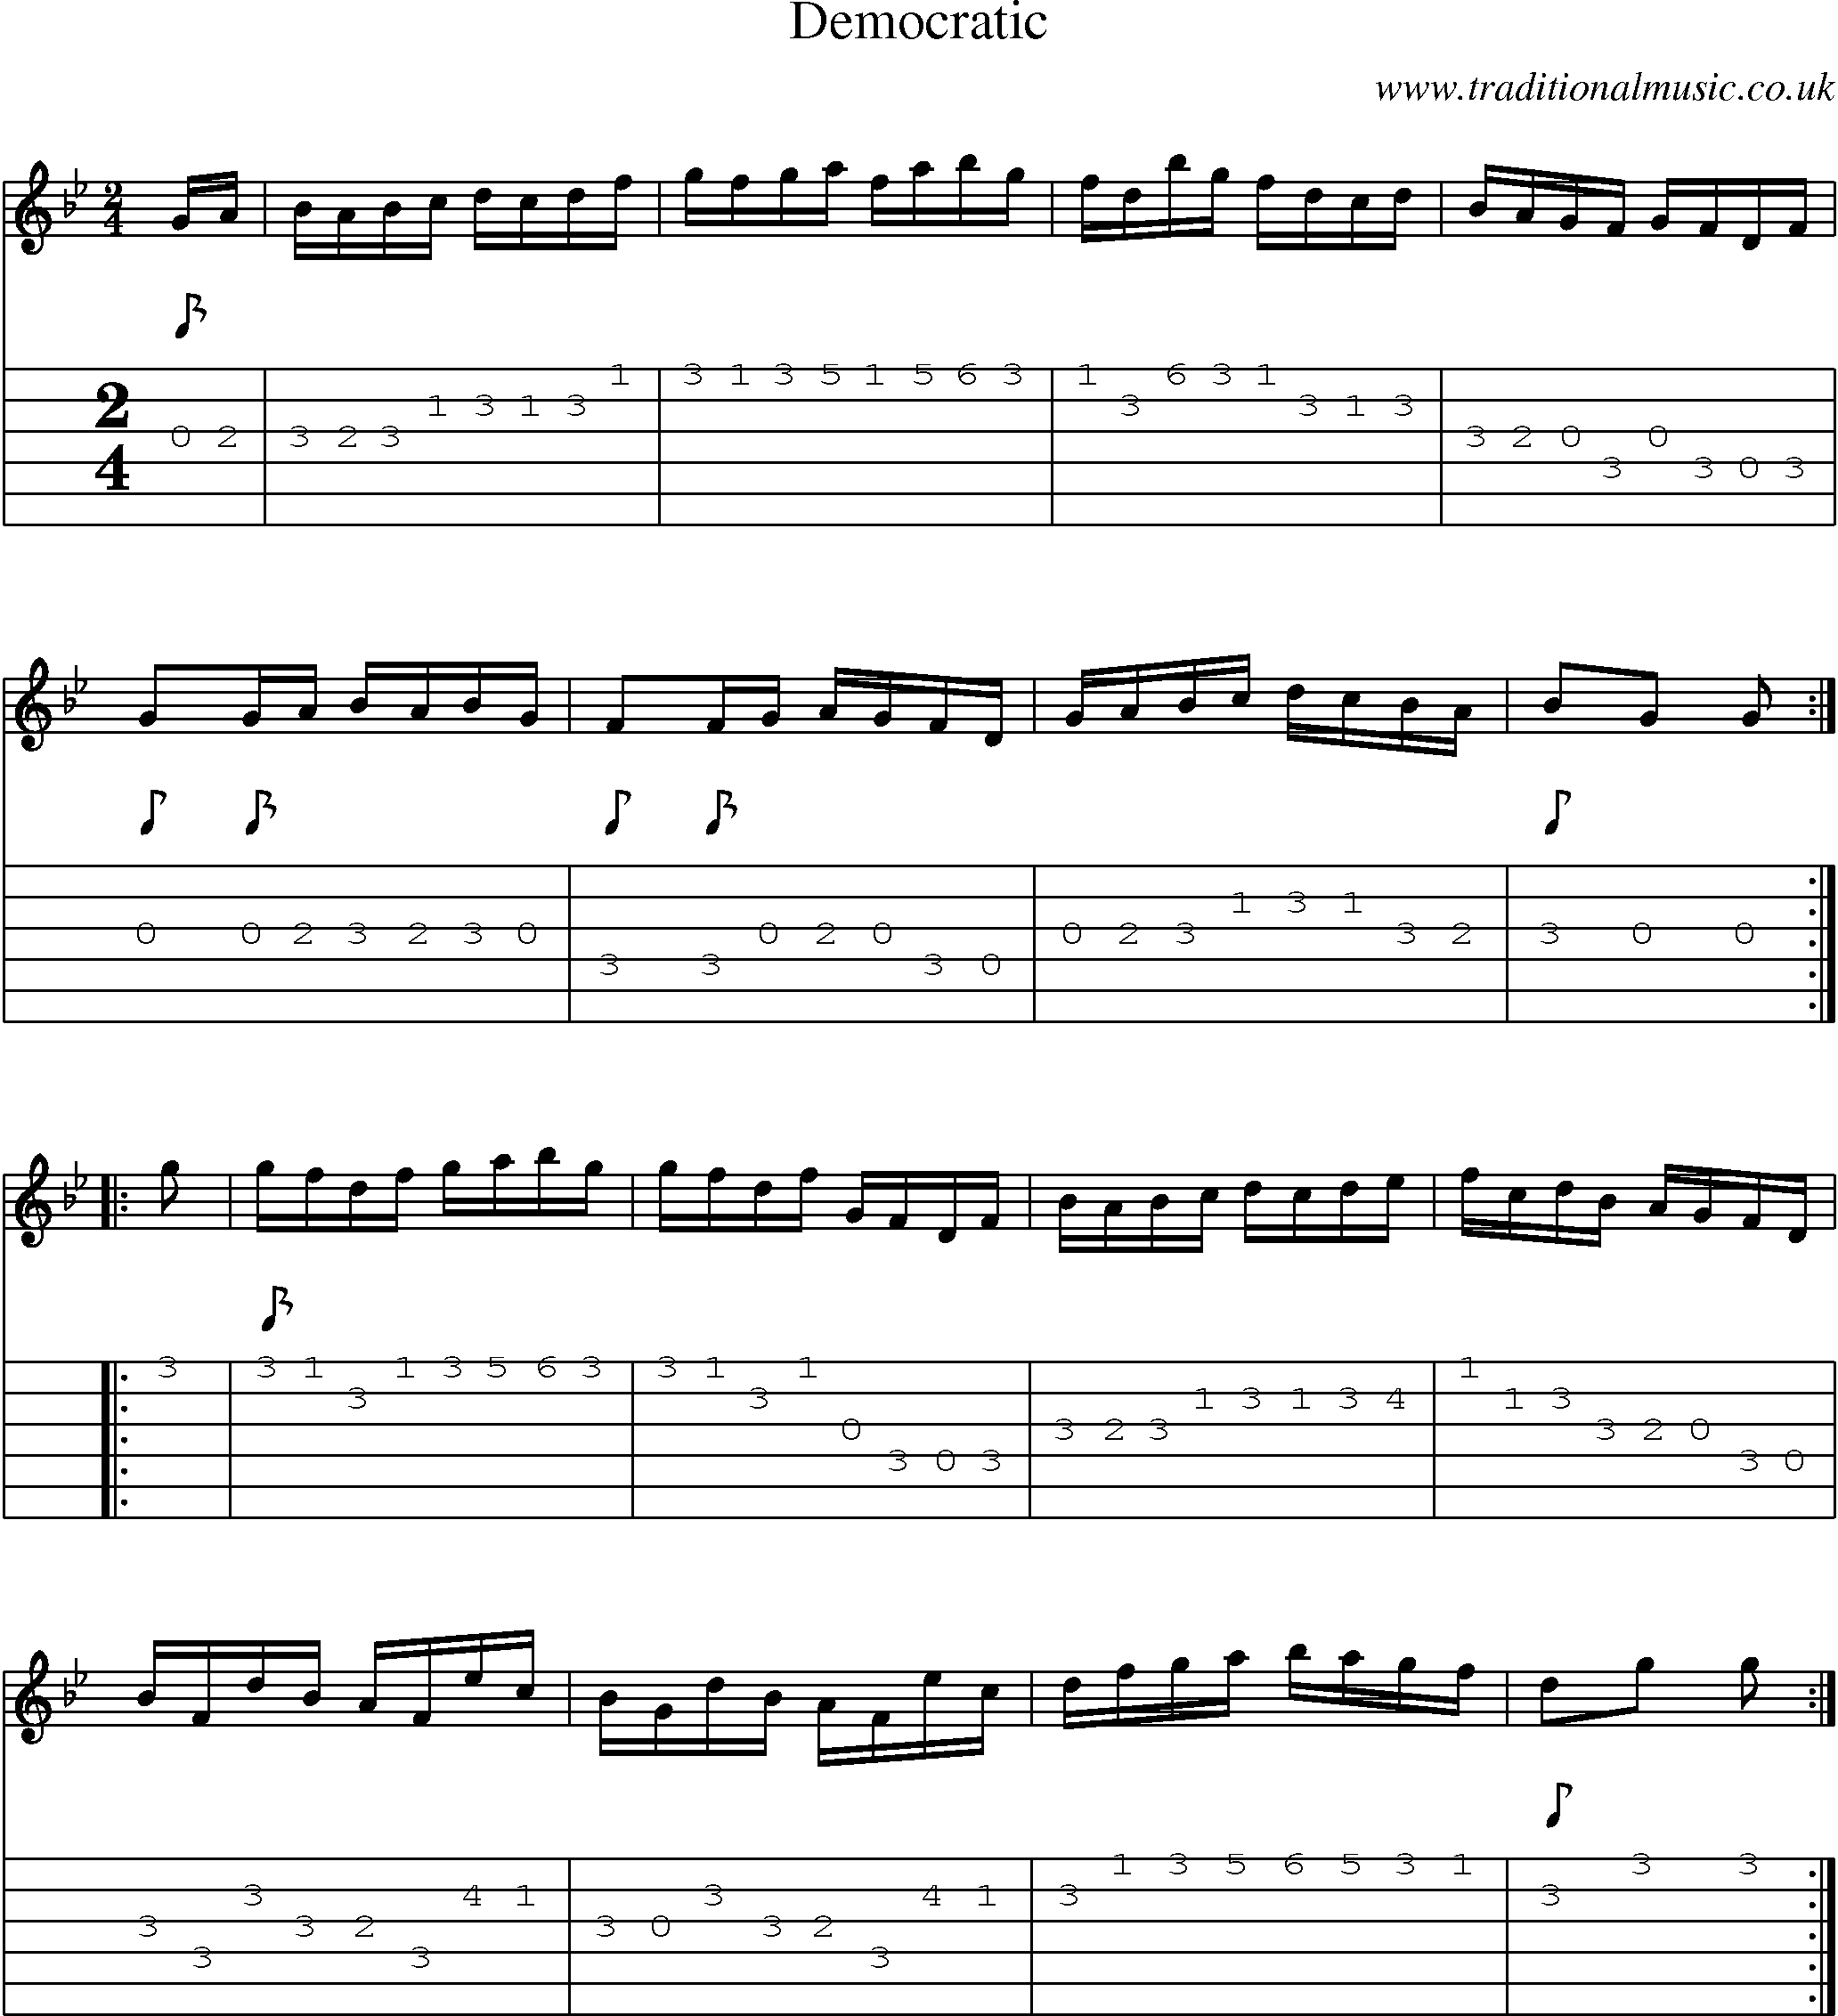 Music Score and Guitar Tabs for Democratic